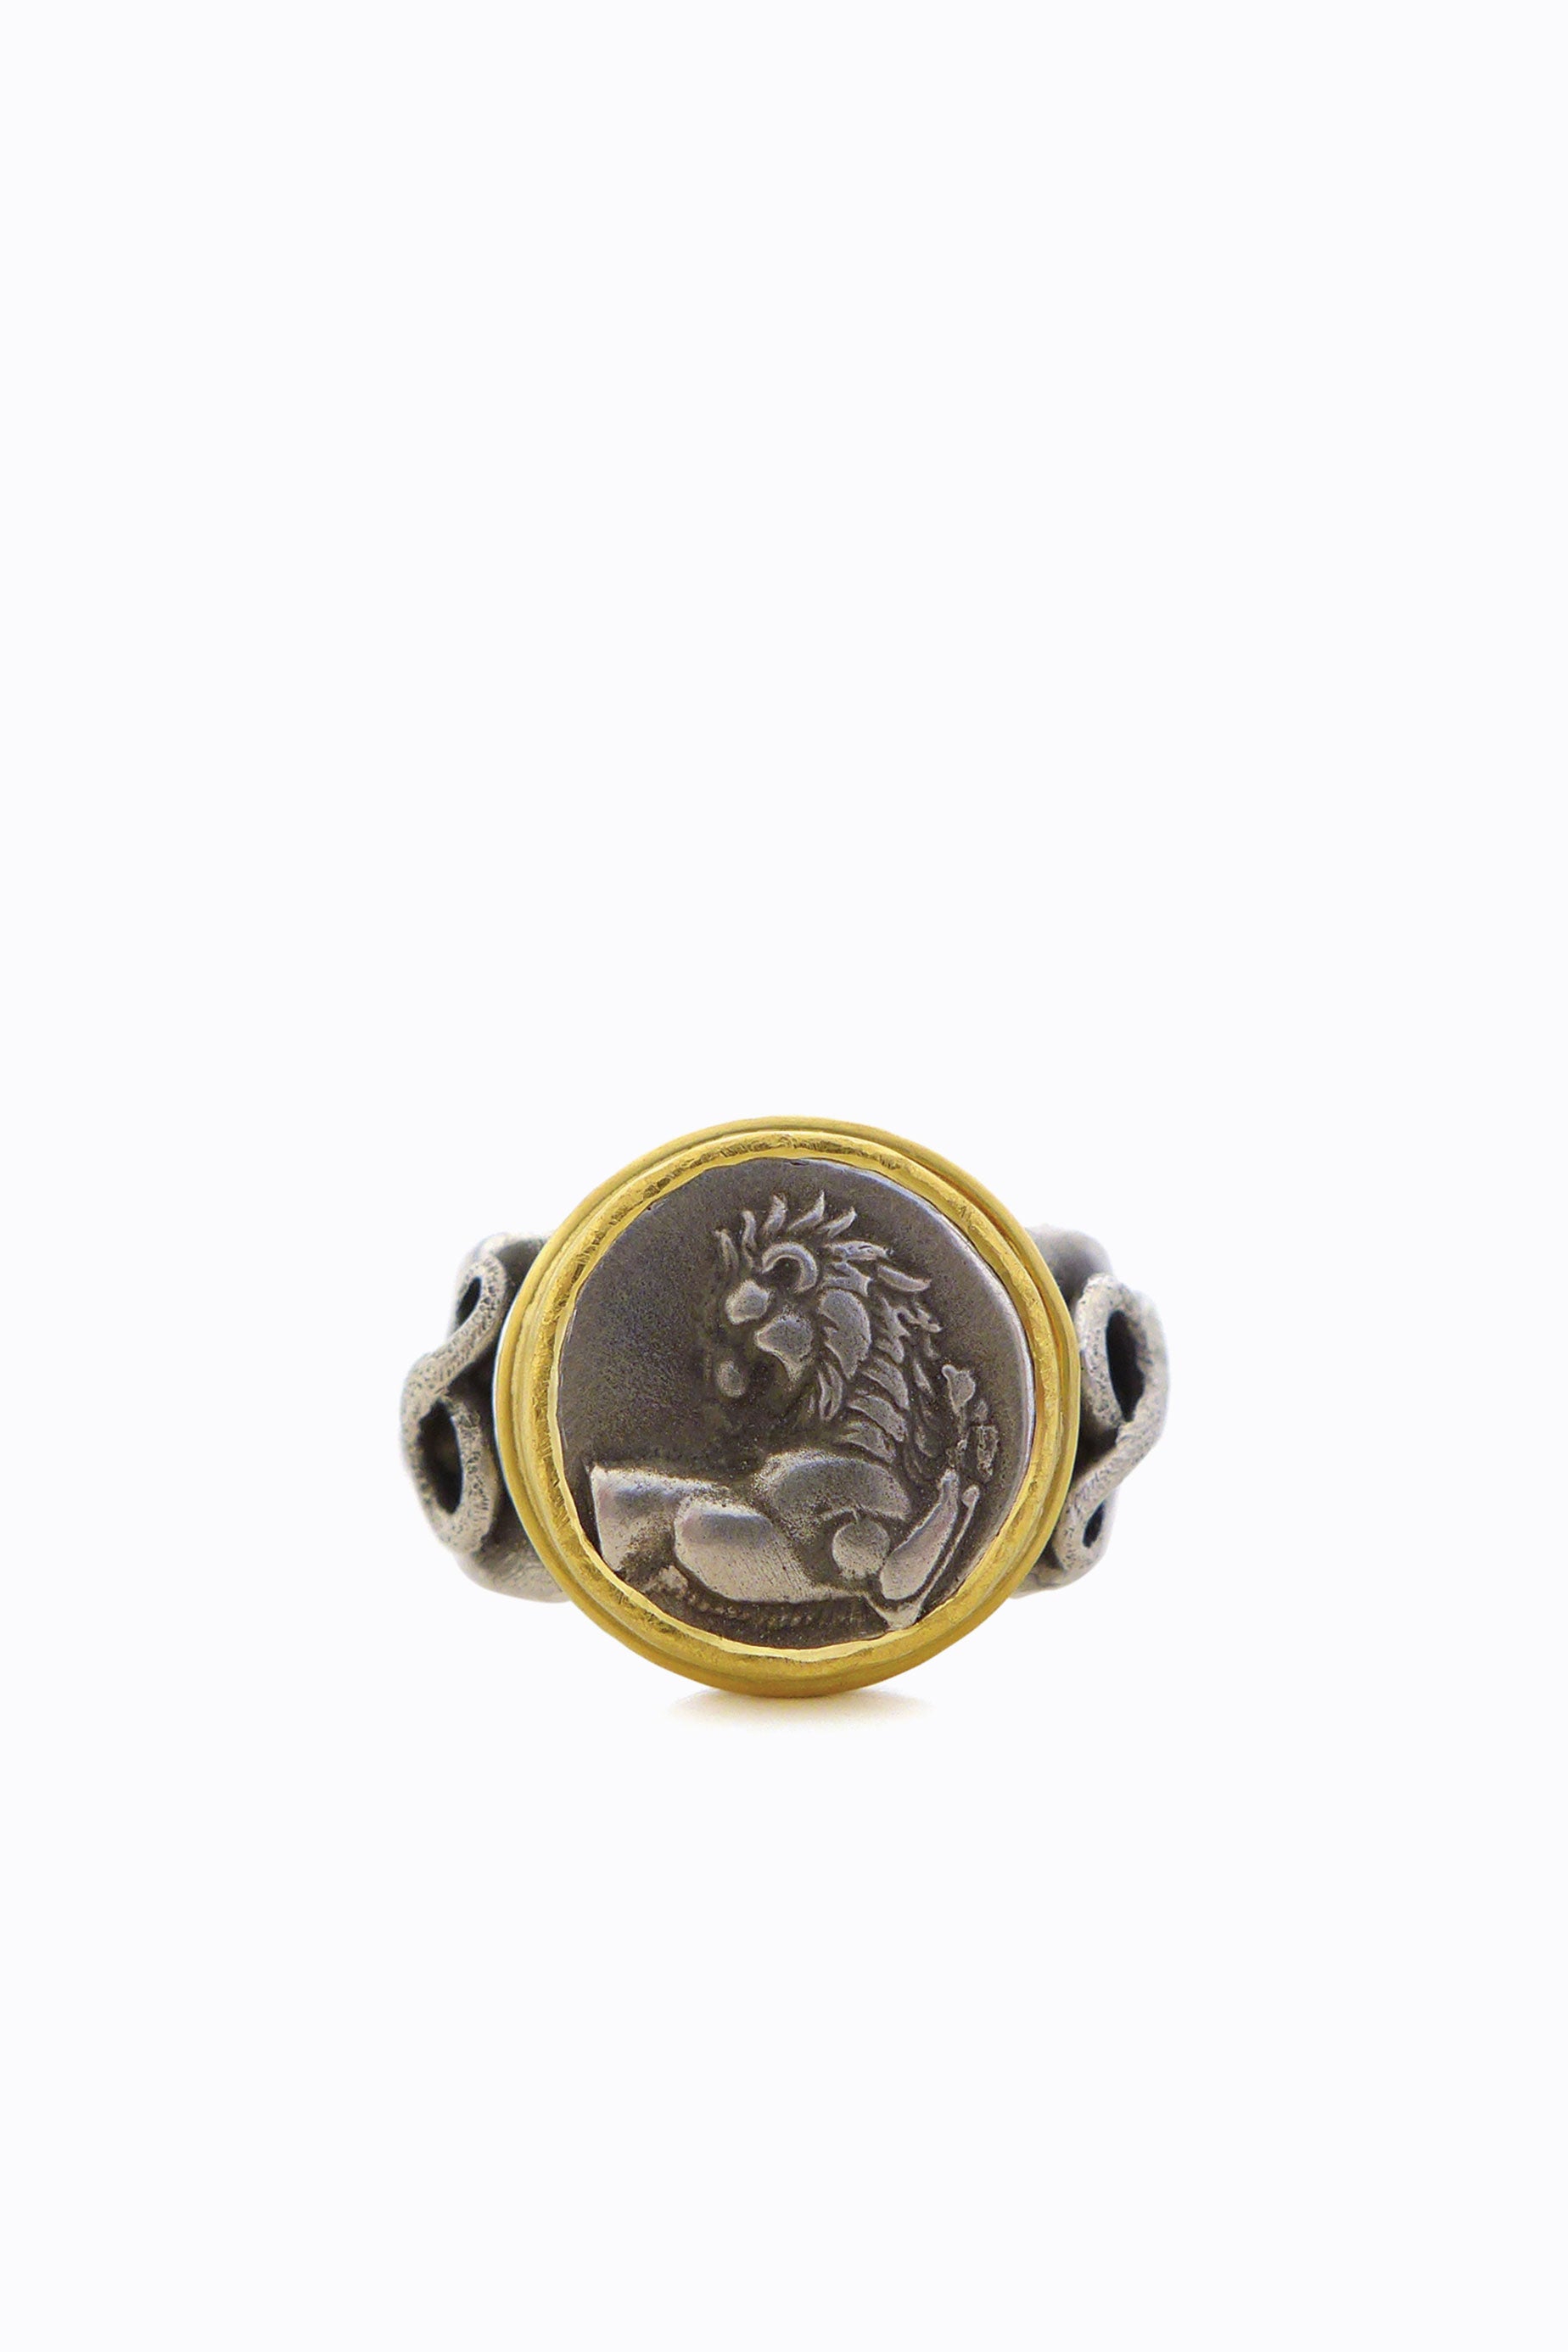 Silver & Gold Tanis Ring